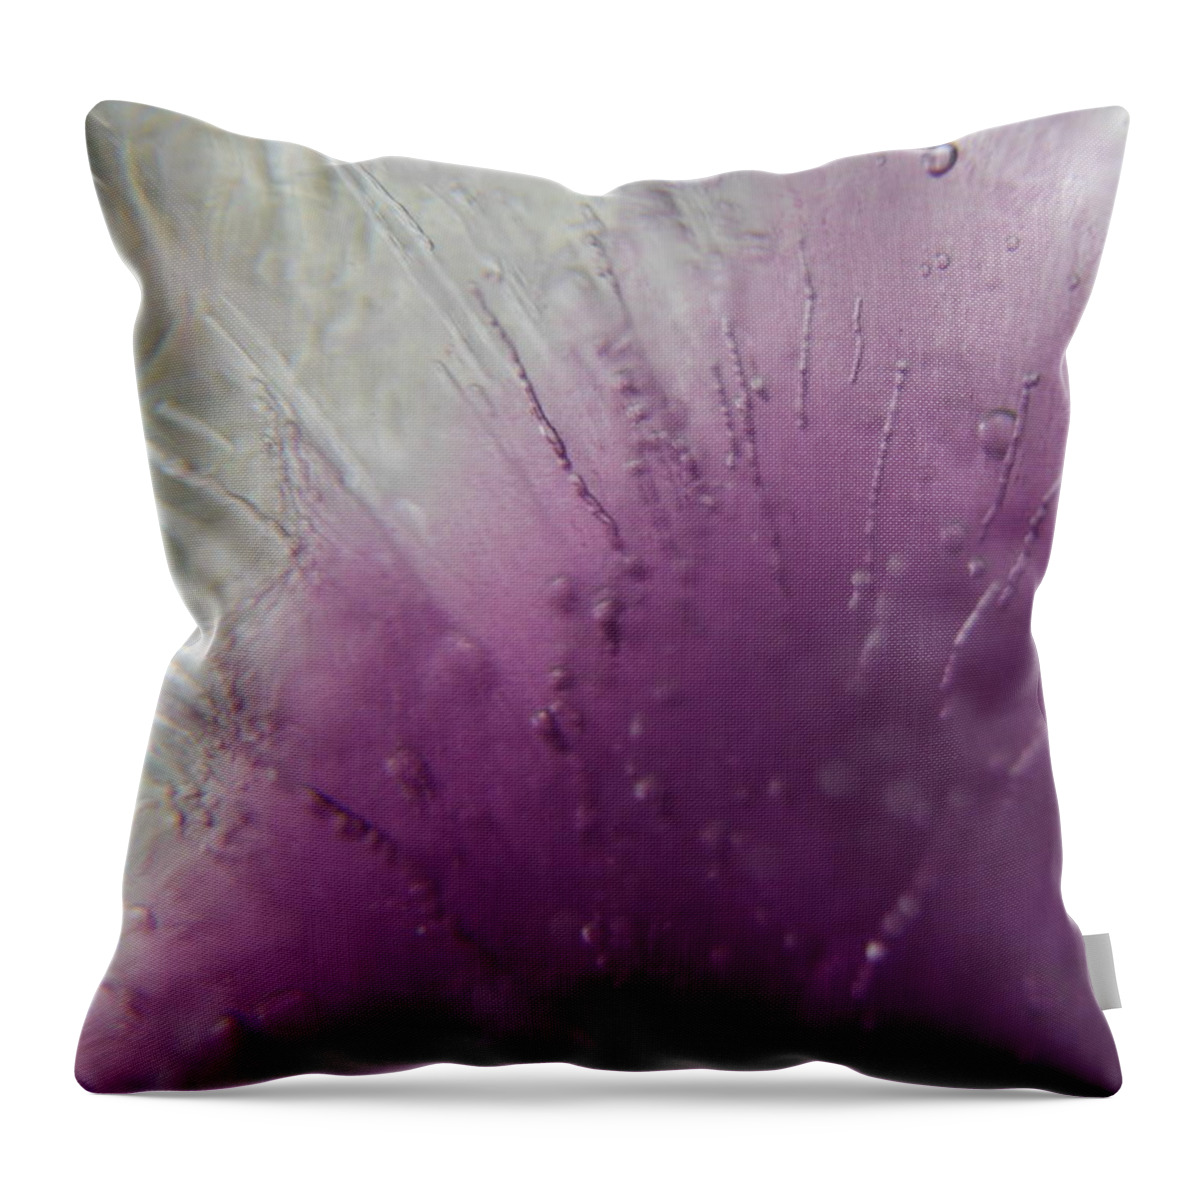 Color In Ice Series Throw Pillow featuring the photograph Color In Ice Series 33 by Paddy Shaffer